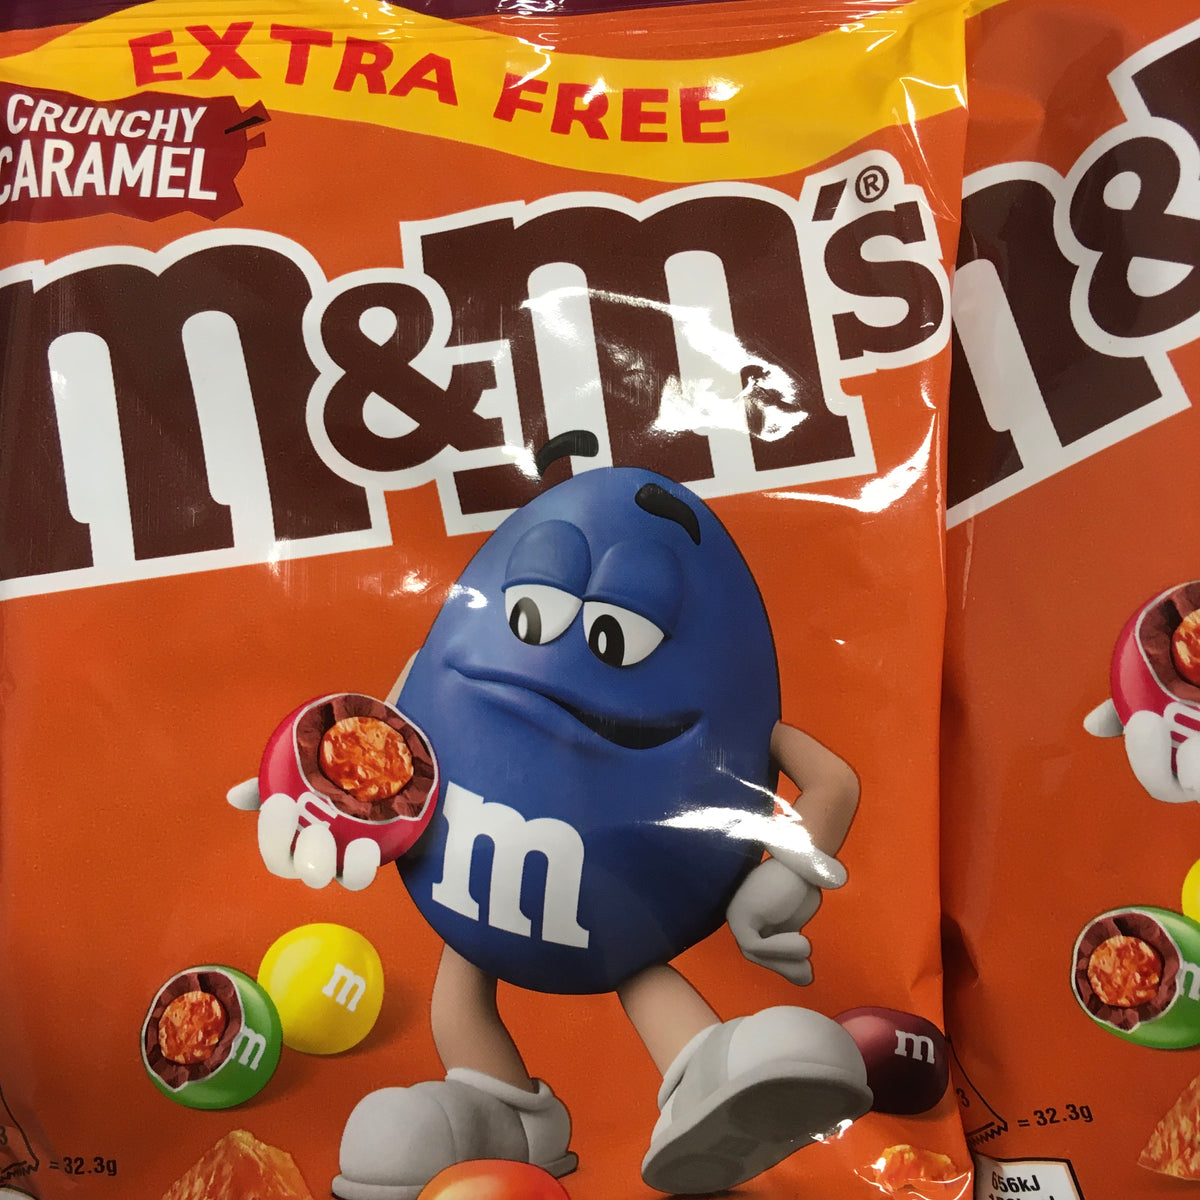 Browse 4x M&M Crunchy Caramel Limited Edition Share Bags (4x97g) M&M's for  more. Stop by our store today to get huge savings